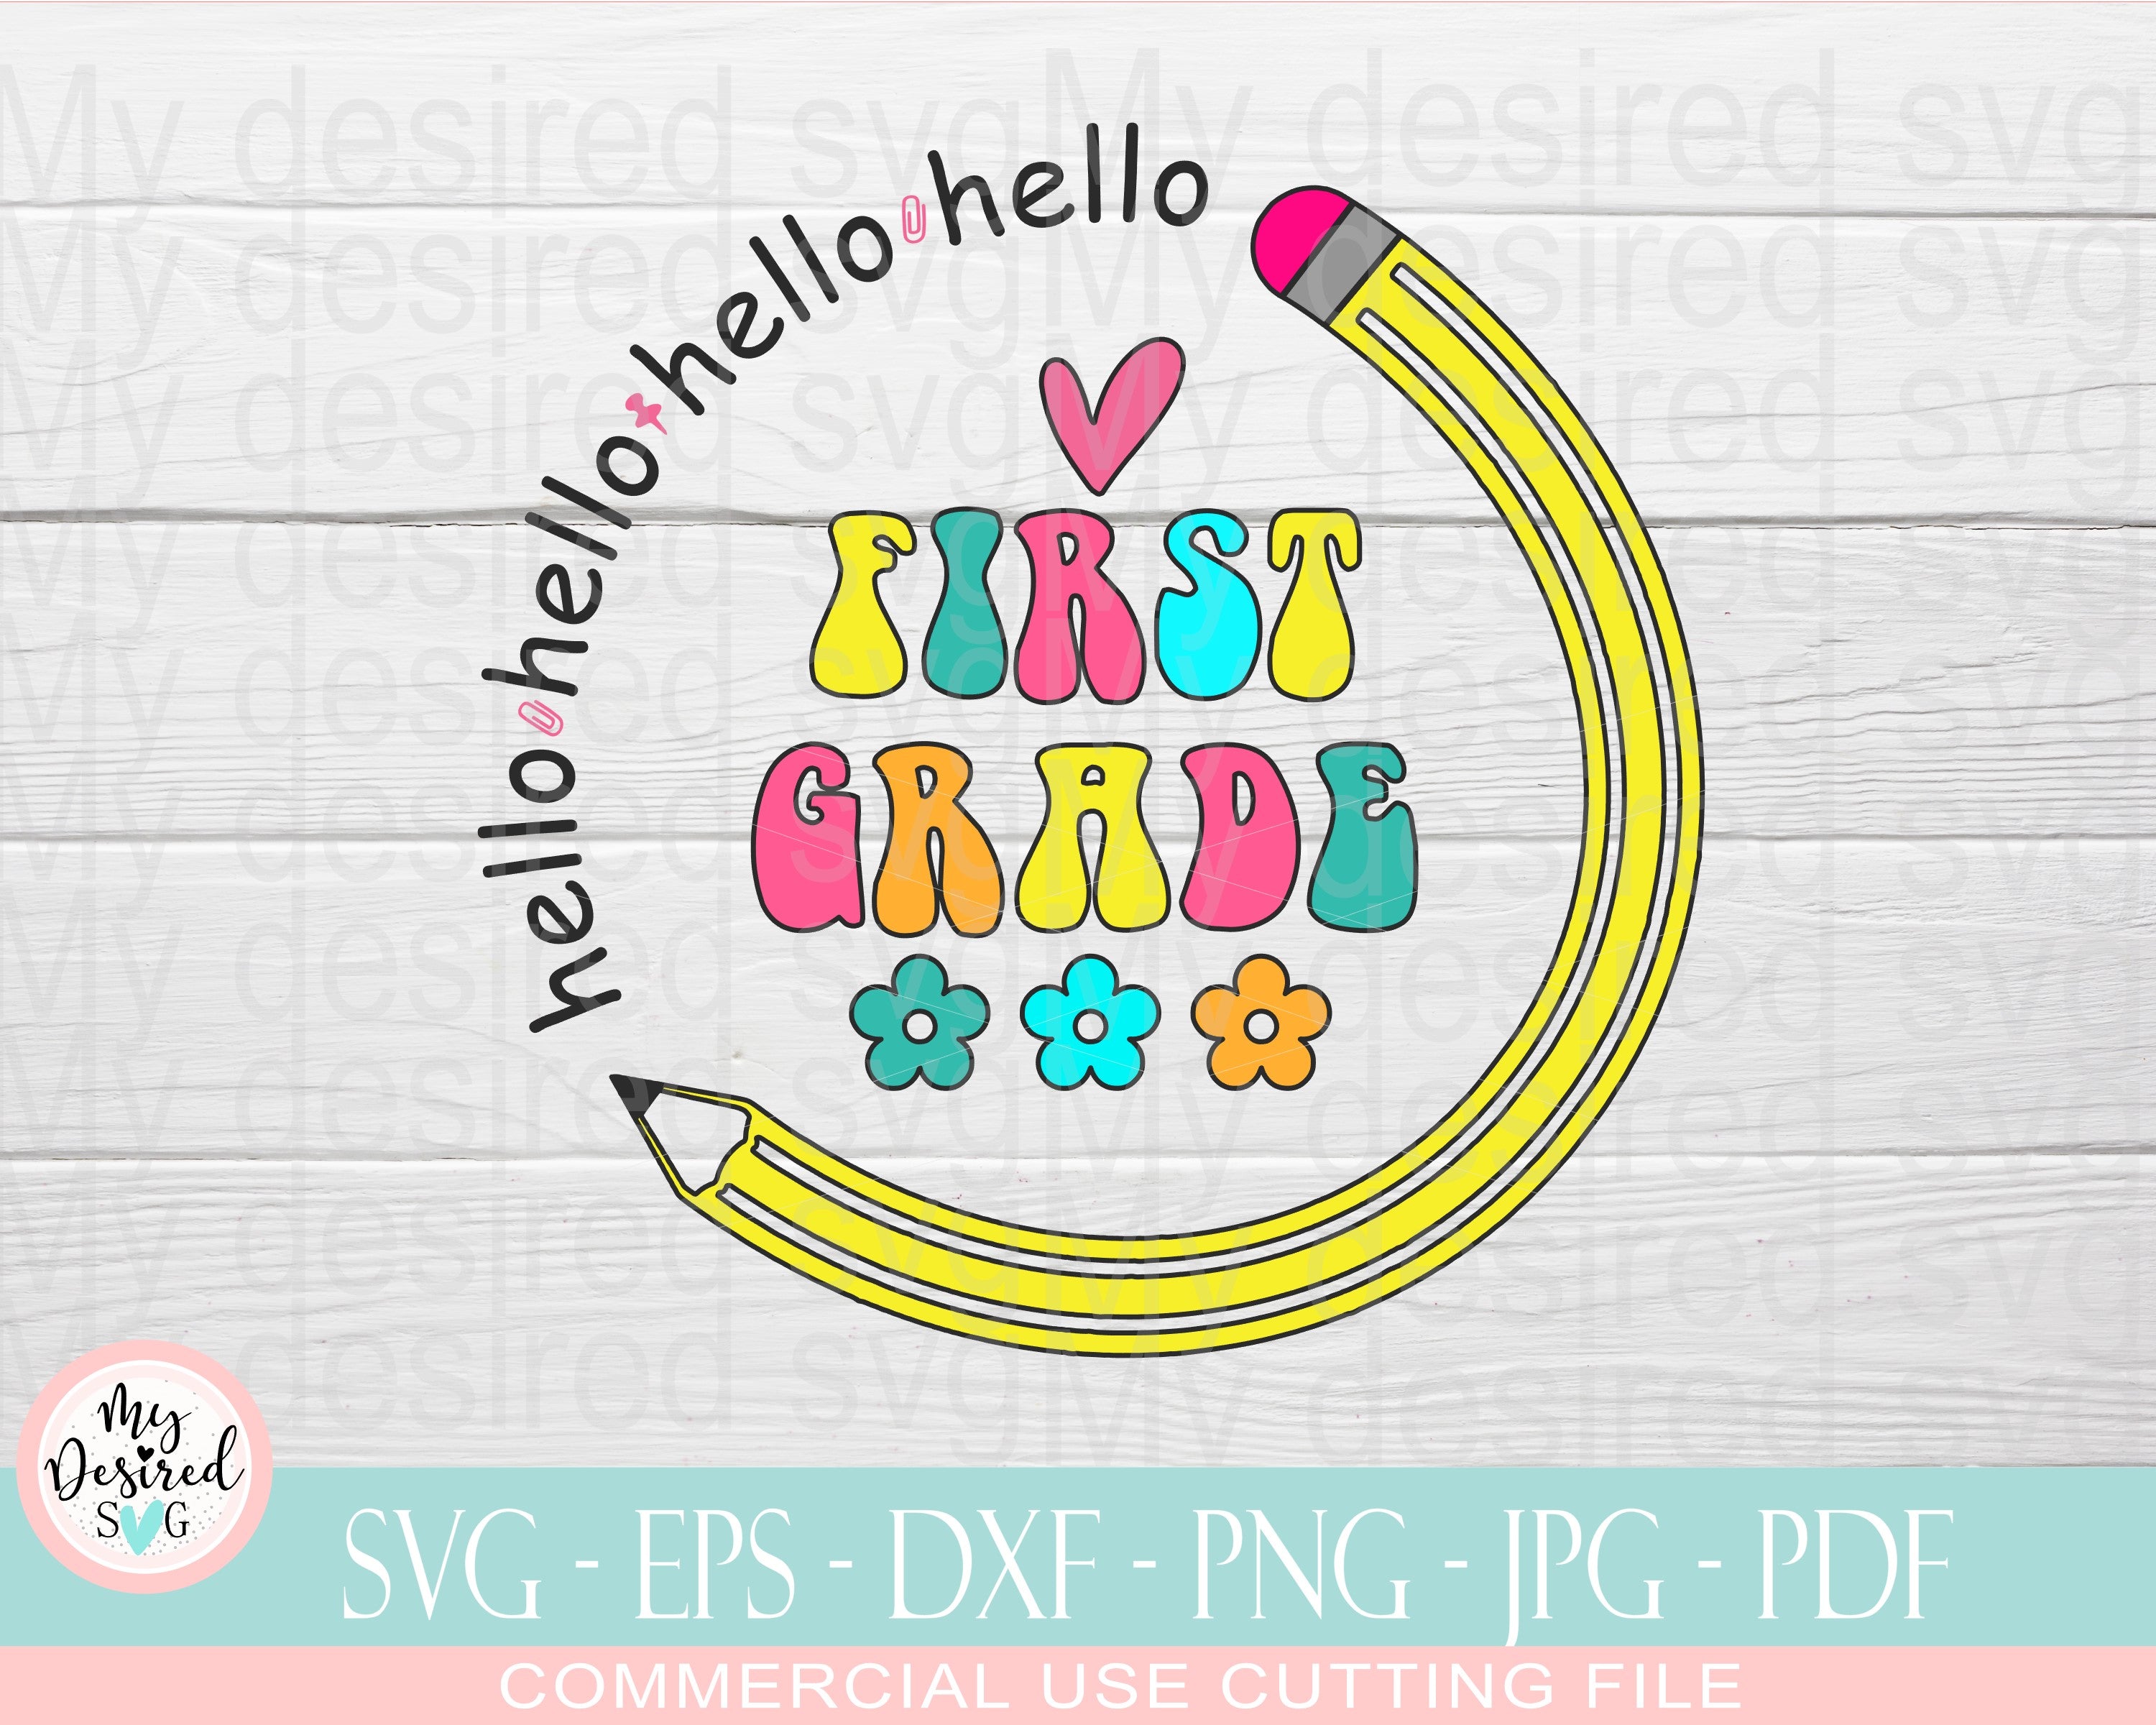 back to school bundle, first day of school, svg files, dxf